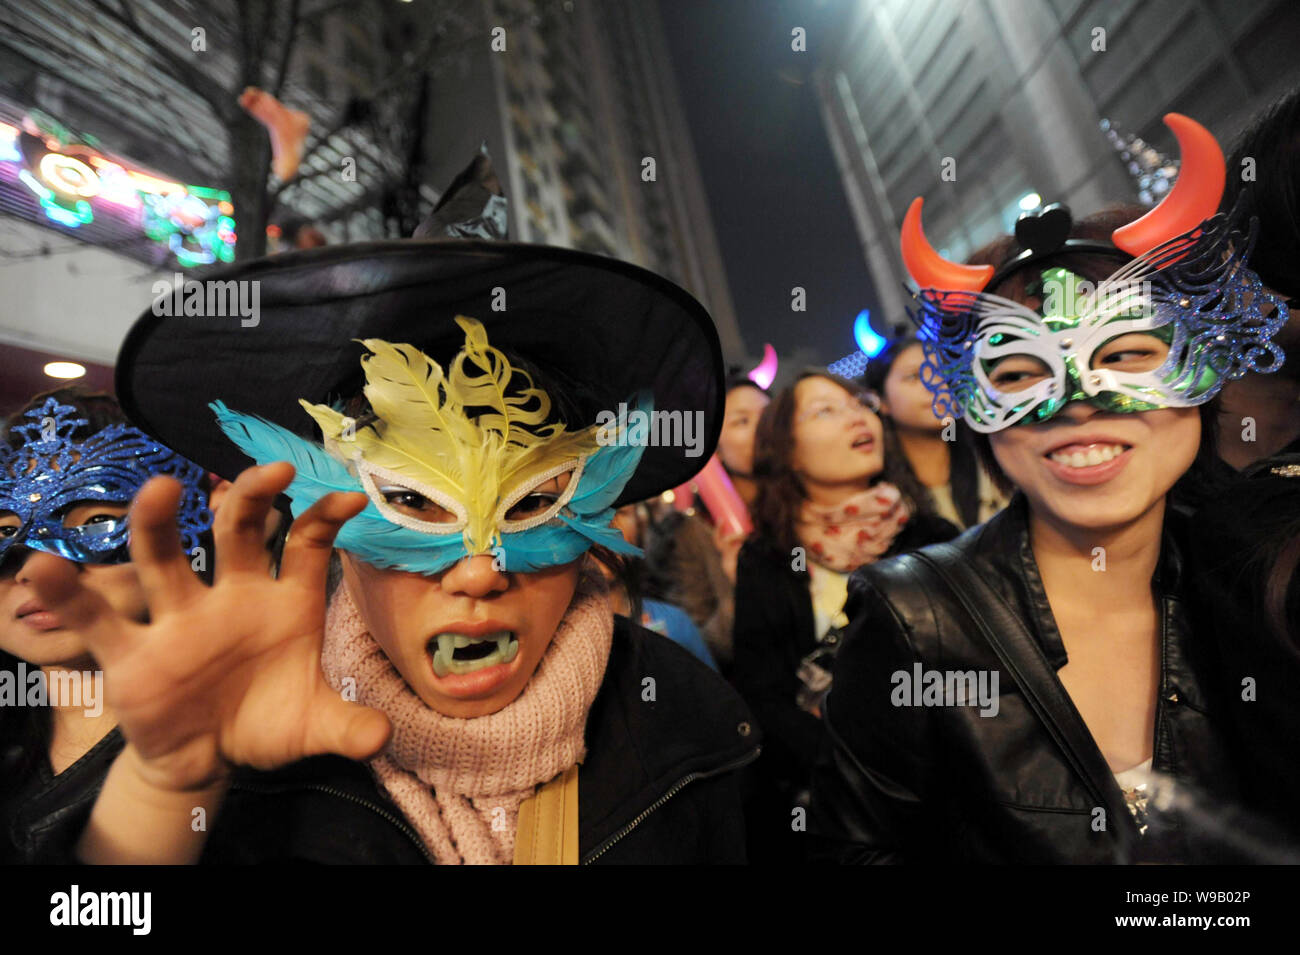 Young Chinese people dressed for Halloween gesture during a celebration in Wuhan city, central Chinas Hubei province, 30 October 2010. Stock Photo